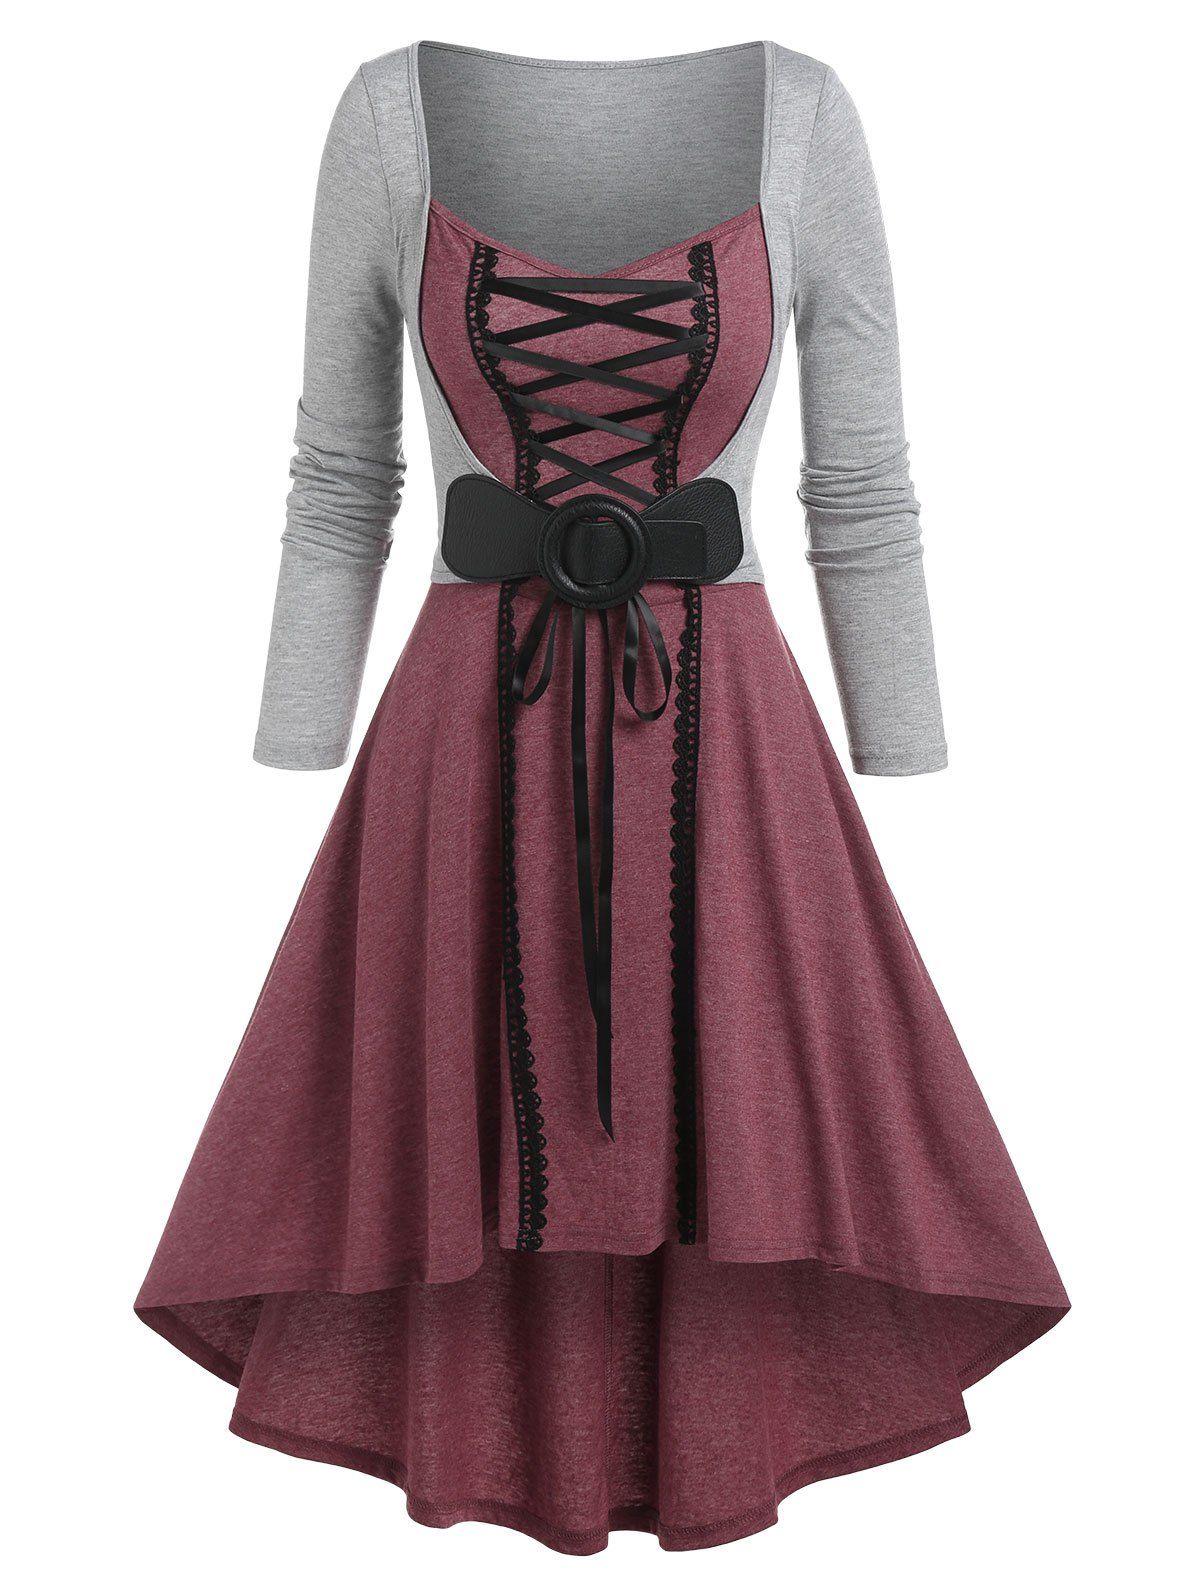 Color Block Lace-up Faux Twinset High-low Dress - DEEP RED XXXL